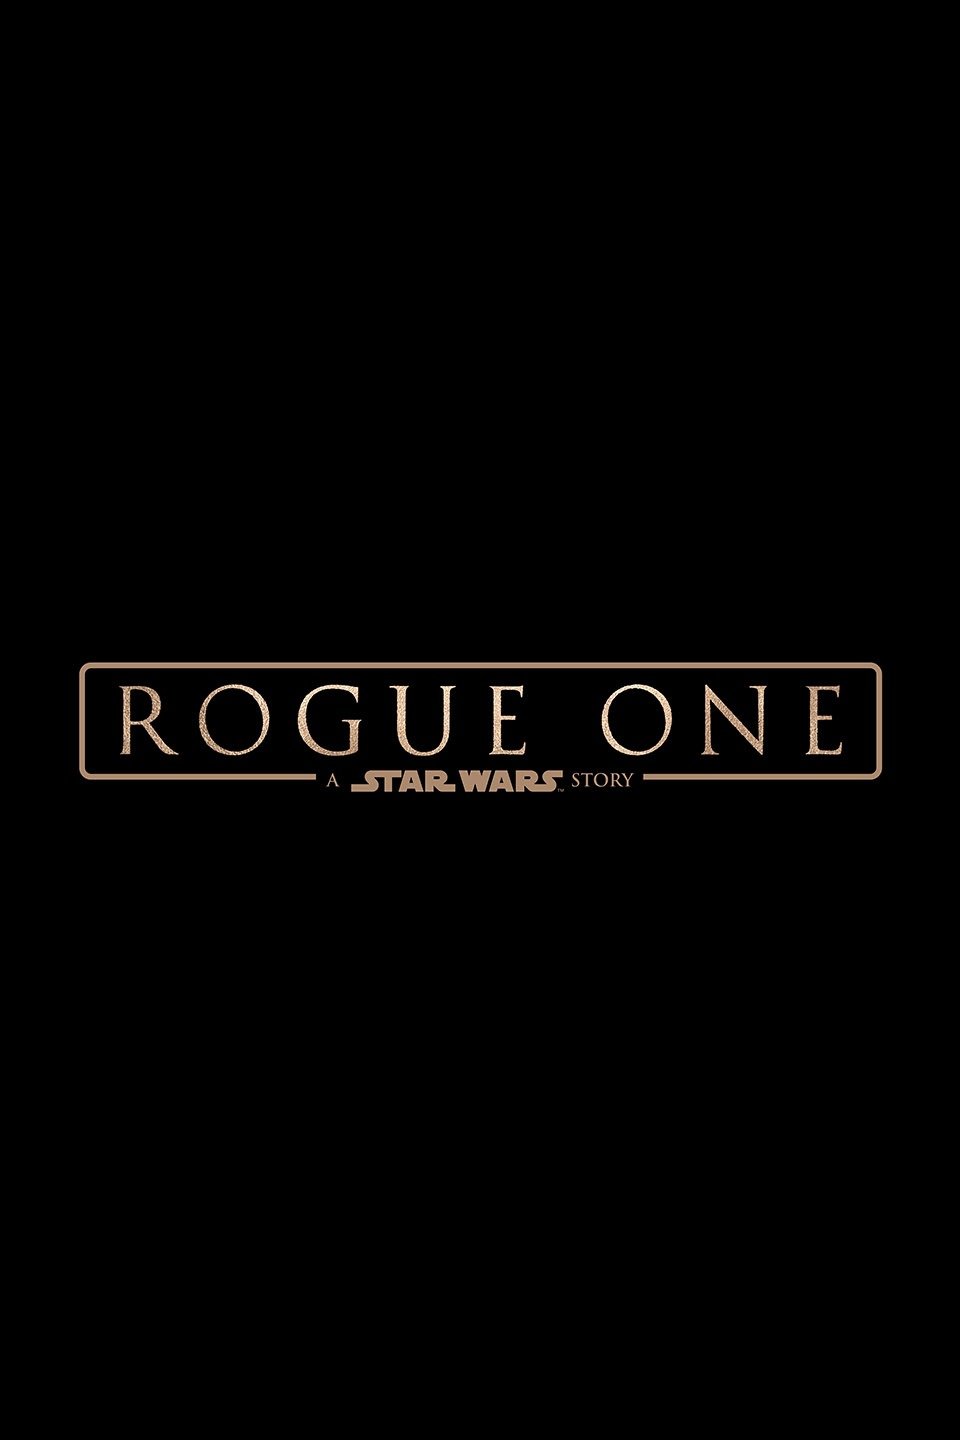 Trailer-tijd – Rogue One: A Star Wars Story (2016)